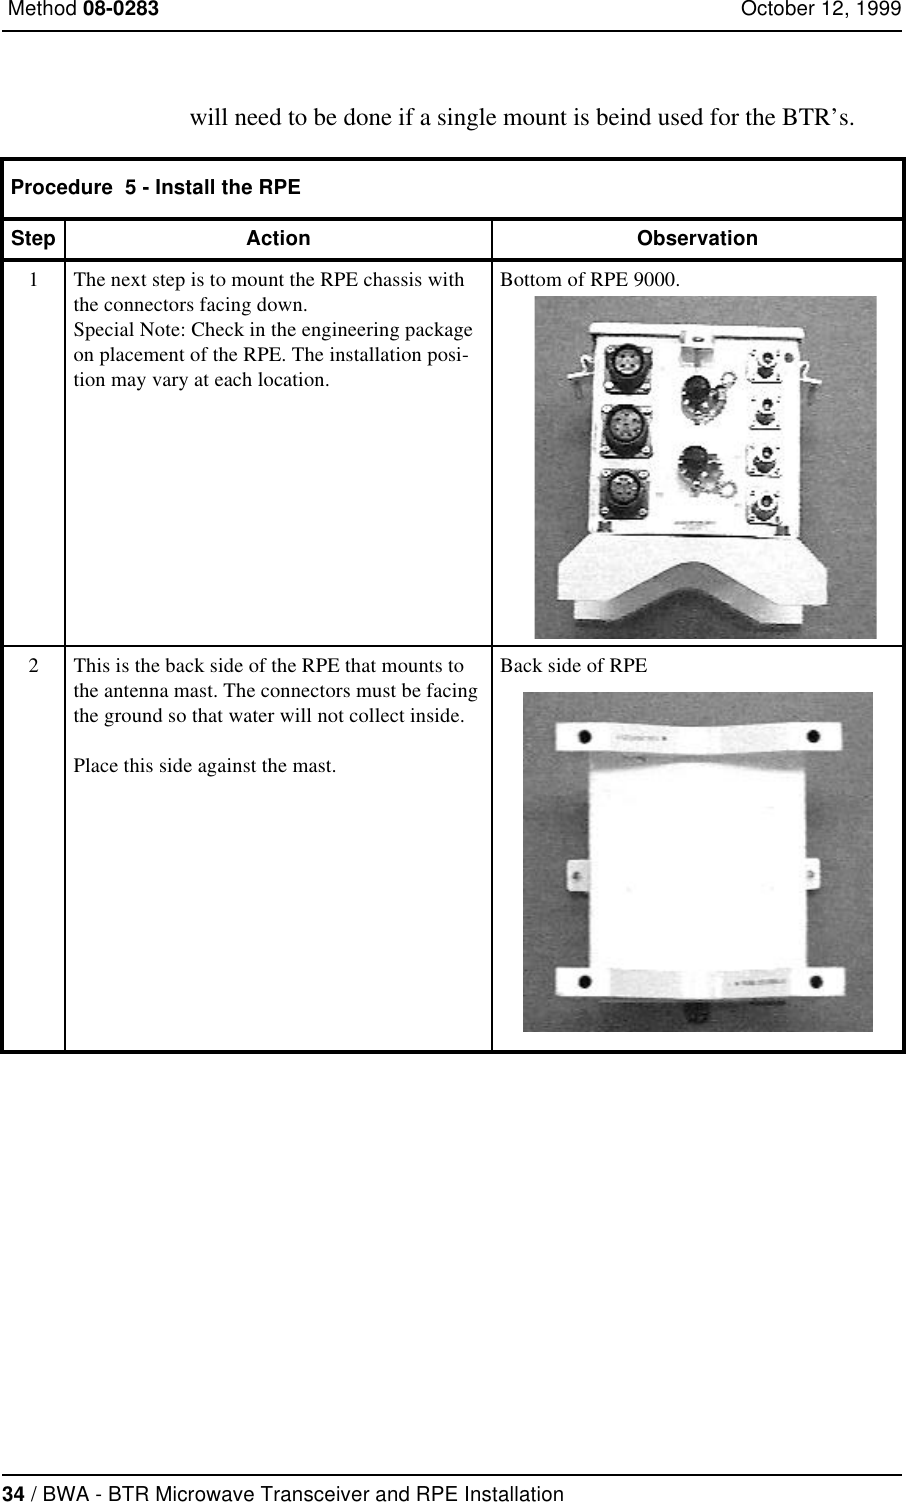 34 / BWA - BTR Microwave Transceiver and RPE Installation Method 08-0283 October 12, 1999will need to be done if a single mount is beind used for the BTR’s.Procedure  5 - Install the RPEStep Action Observation1The next step is to mount the RPE chassis with the connectors facing down. Special Note: Check in the engineering package on placement of the RPE. The installation posi-tion may vary at each location.Bottom of RPE 9000.2This is the back side of the RPE that mounts to the antenna mast. The connectors must be facing the ground so that water will not collect inside.Place this side against the mast.Back side of RPE